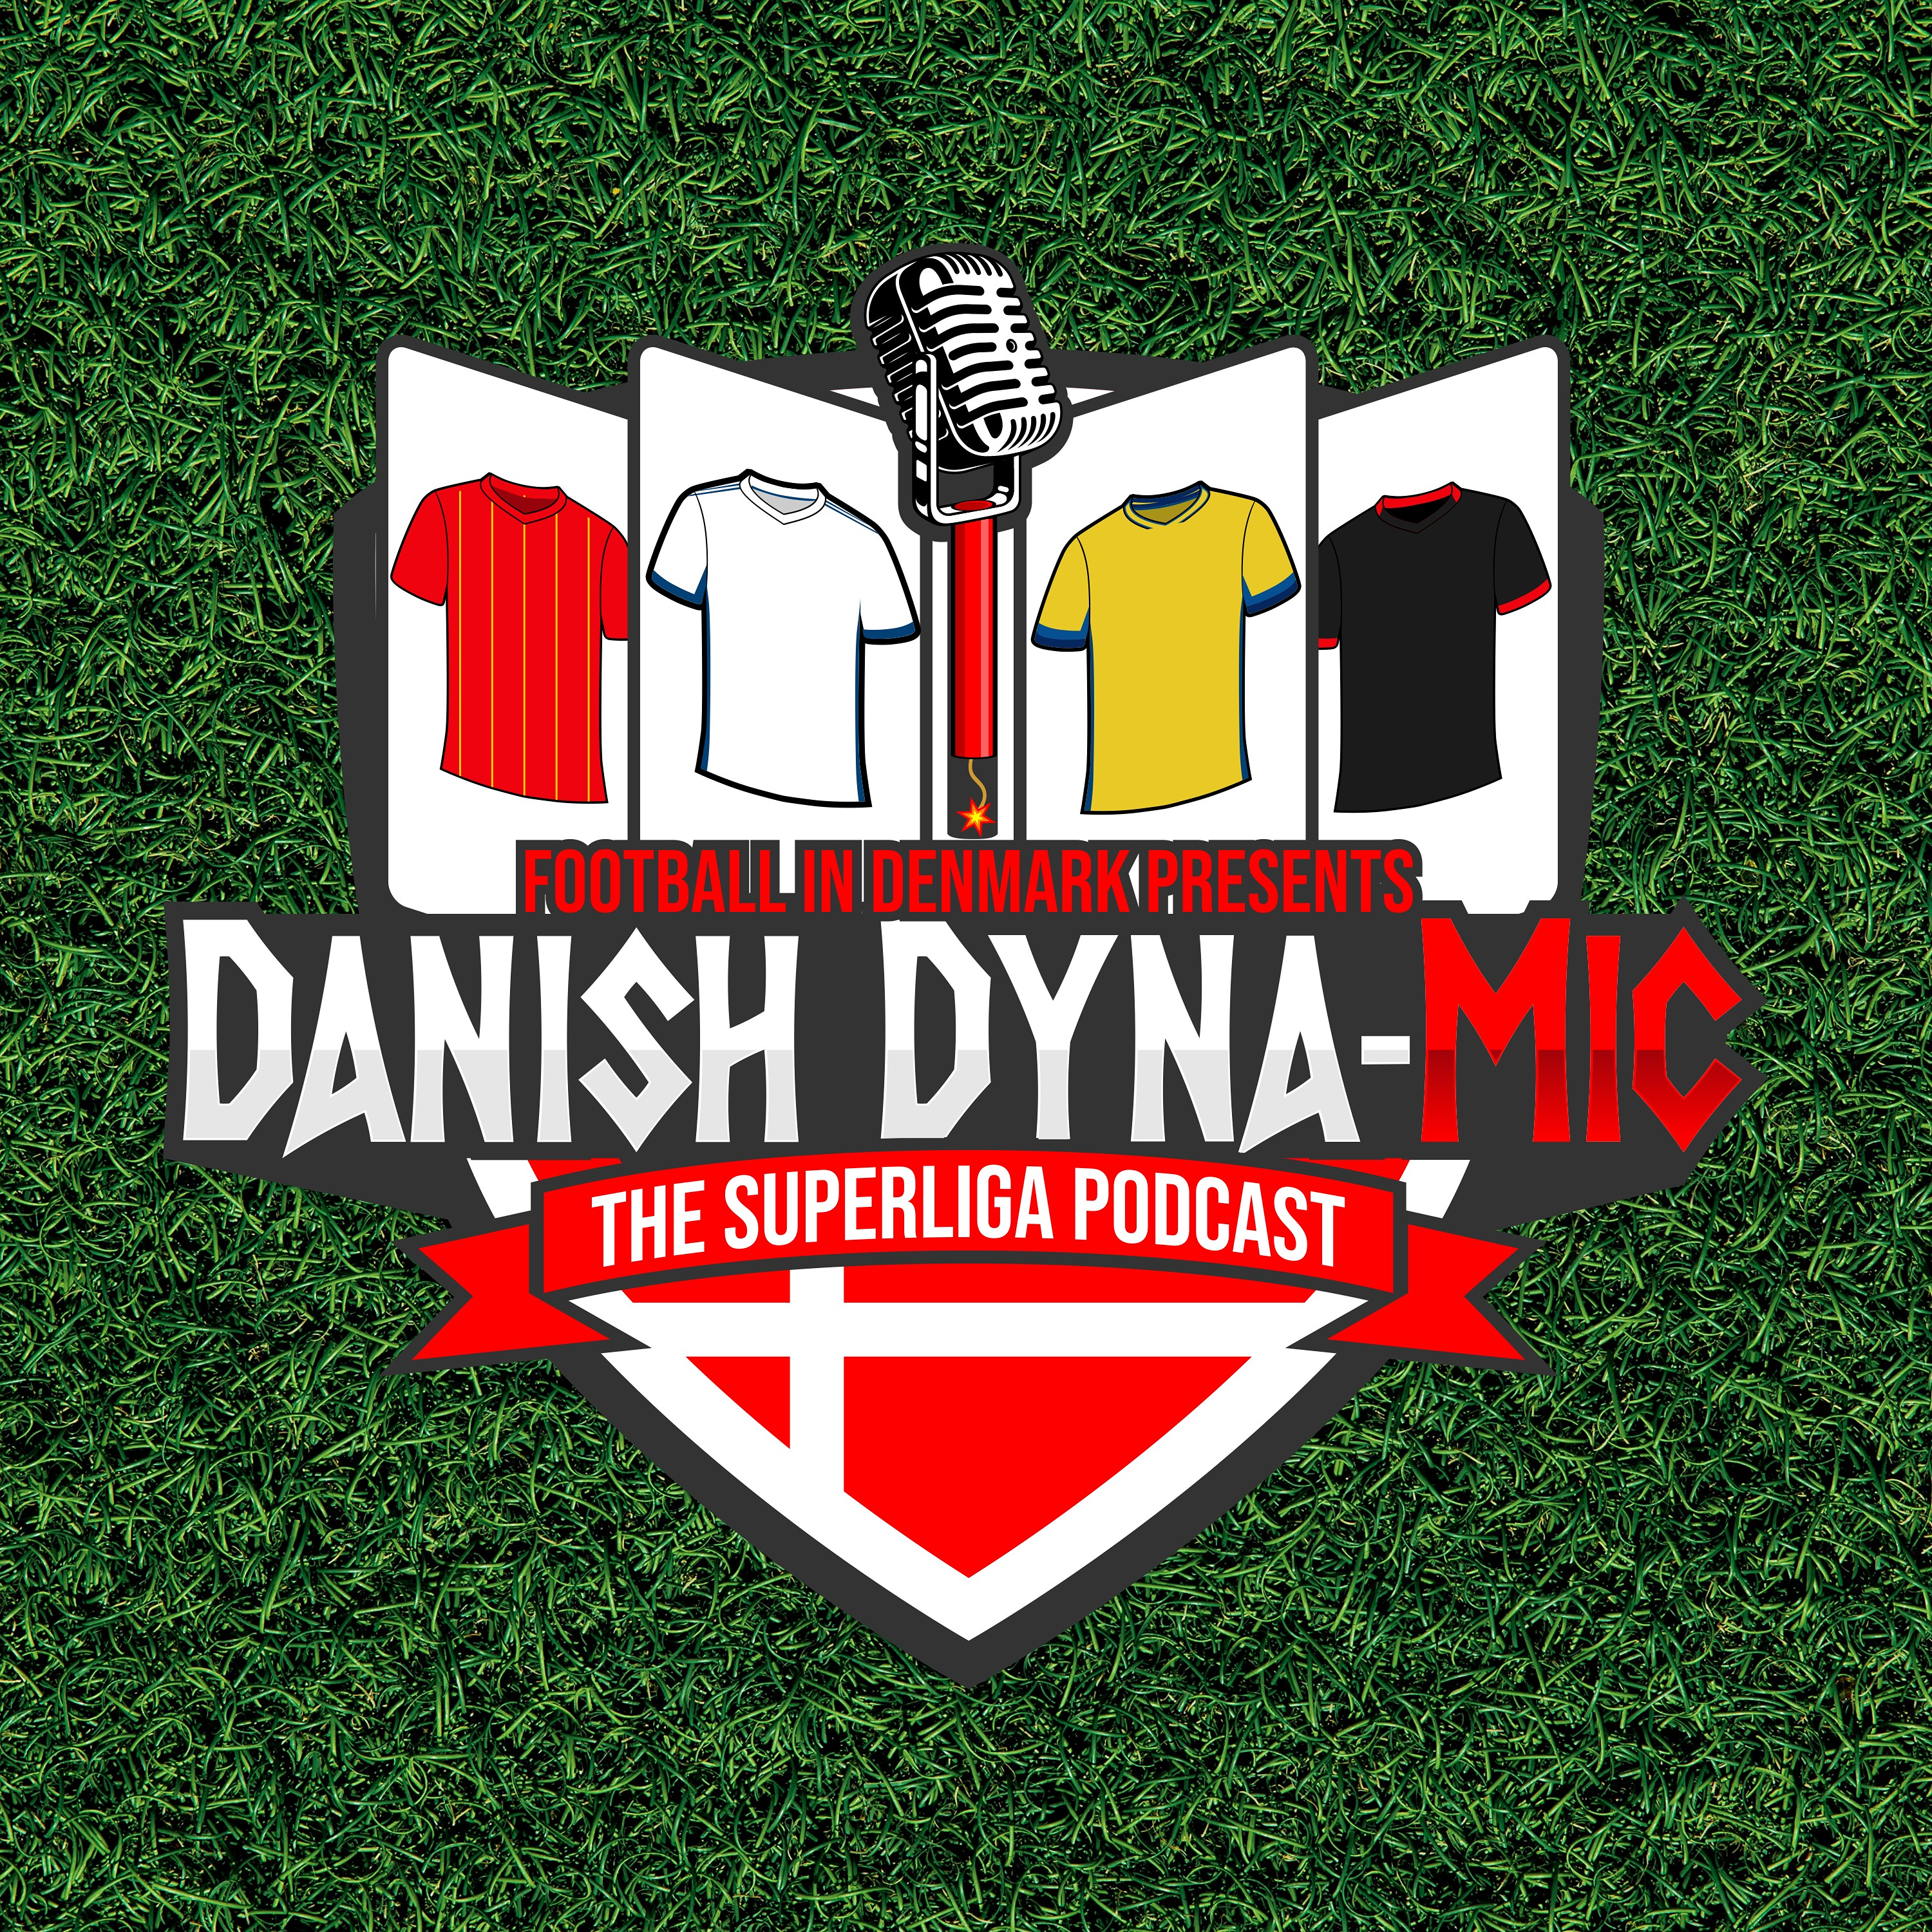 Episode 18: An exclusive interview with AC Horsens GK Matej Delac